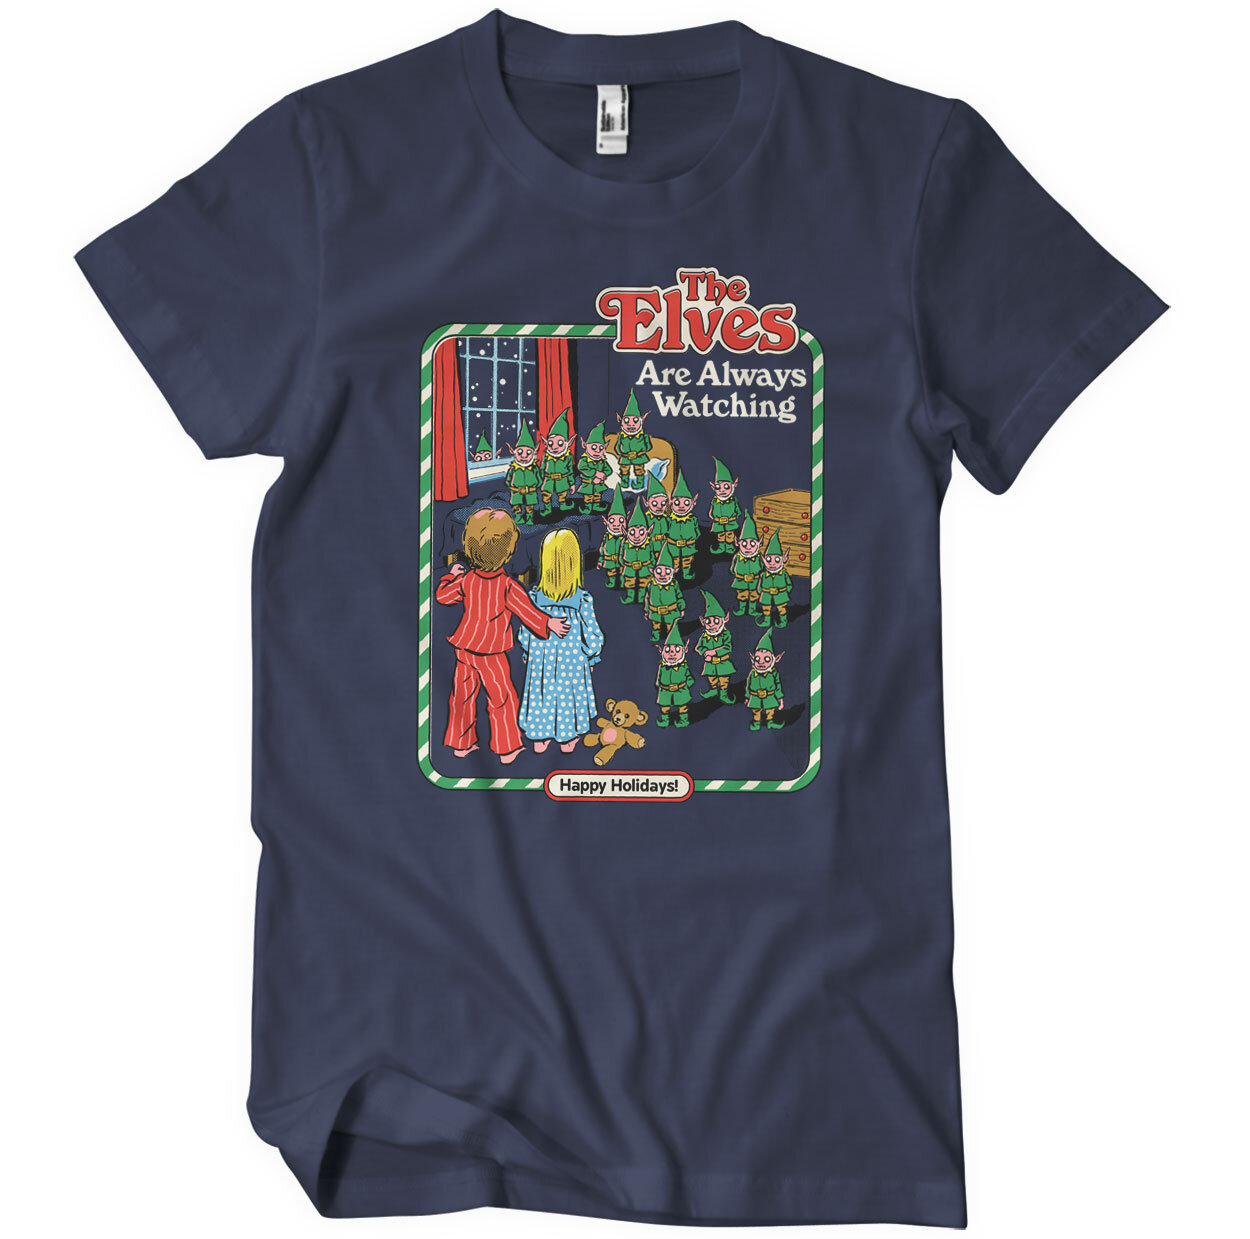 The Elves Are Watching T-Shirt